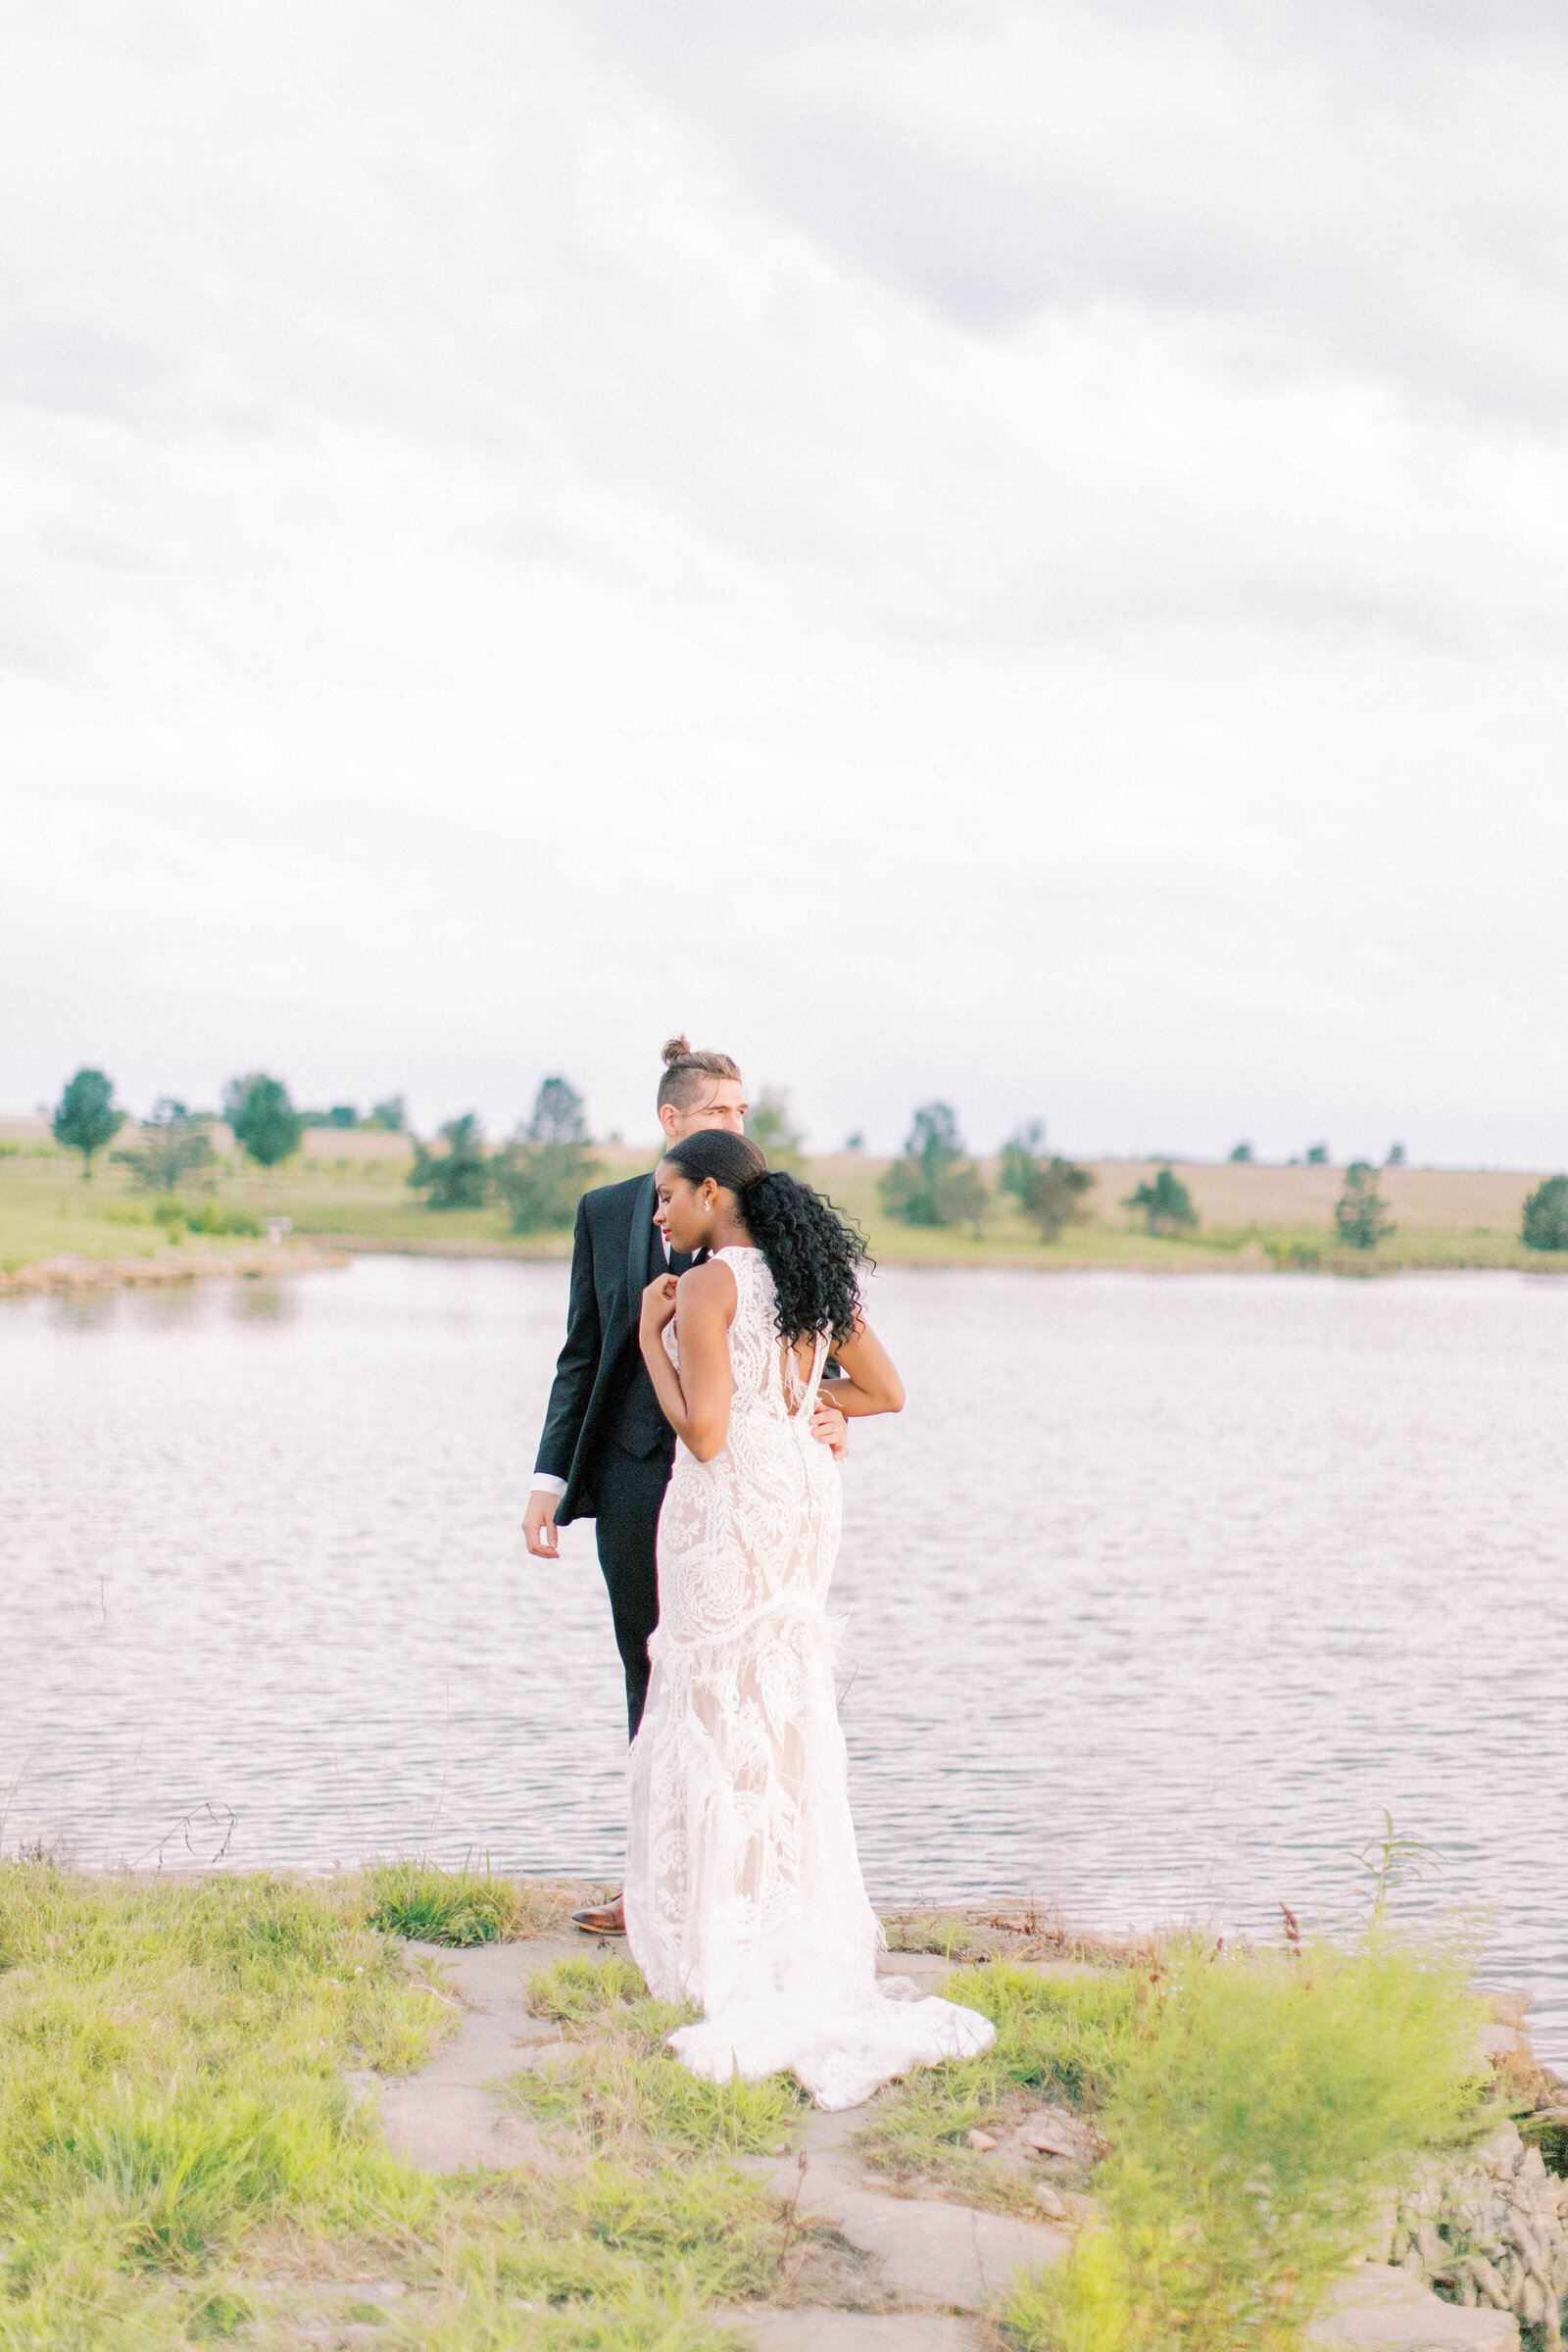 Bride and groom share moment by the lake at Bourgmont Winery in Kansas sunset